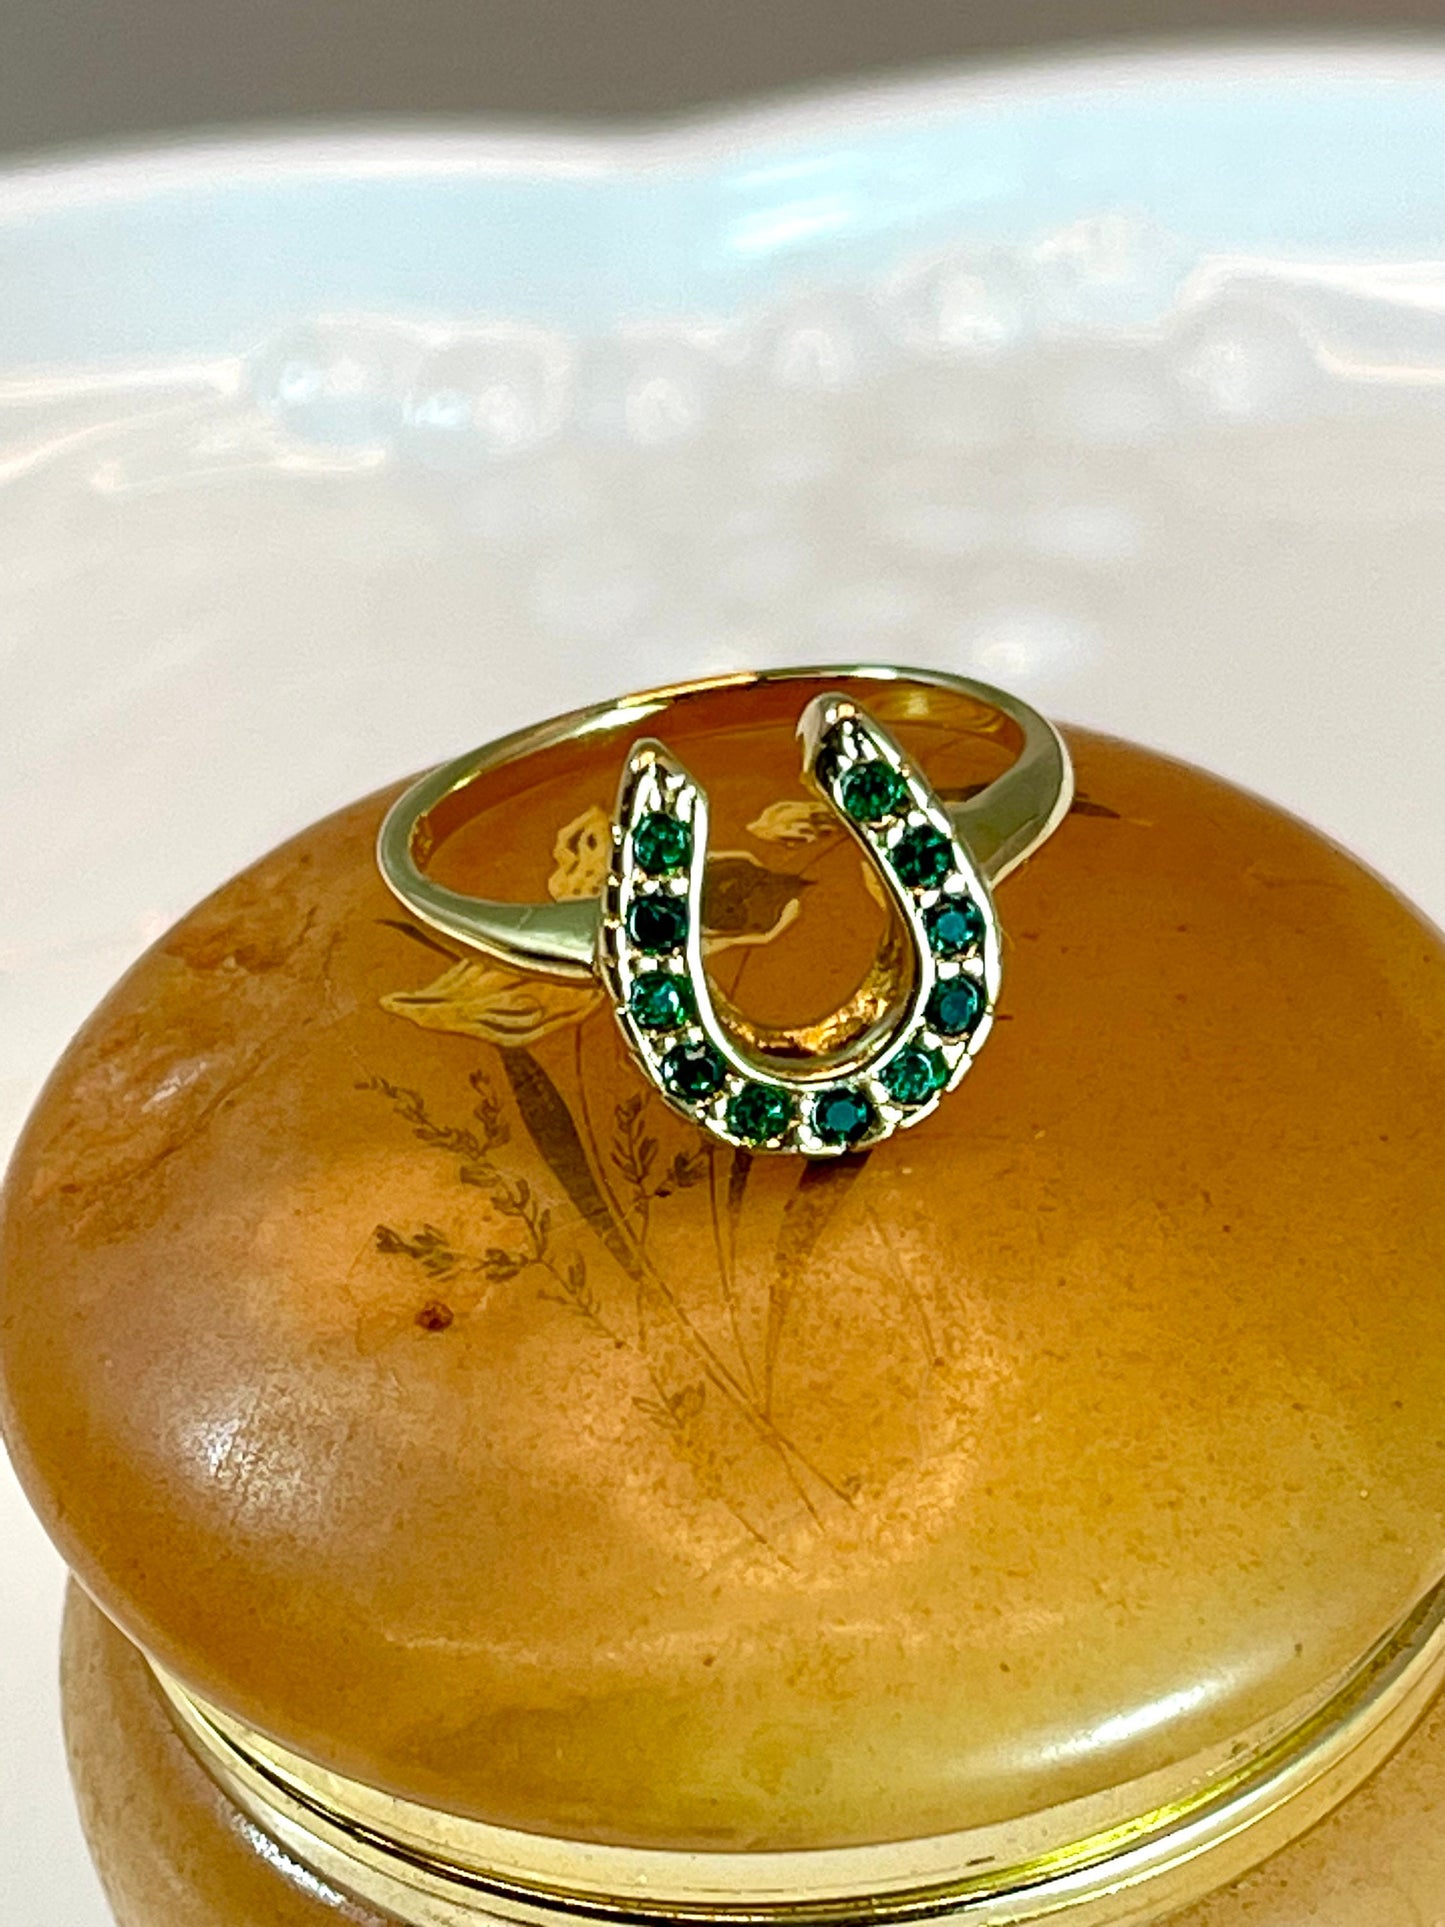 Vintage Ring 1970s Lucky Horseshoe Ring Clear Swarovski Crystals 18k Gold Antique Womans Jewelry Horse #R1236 Size: 3